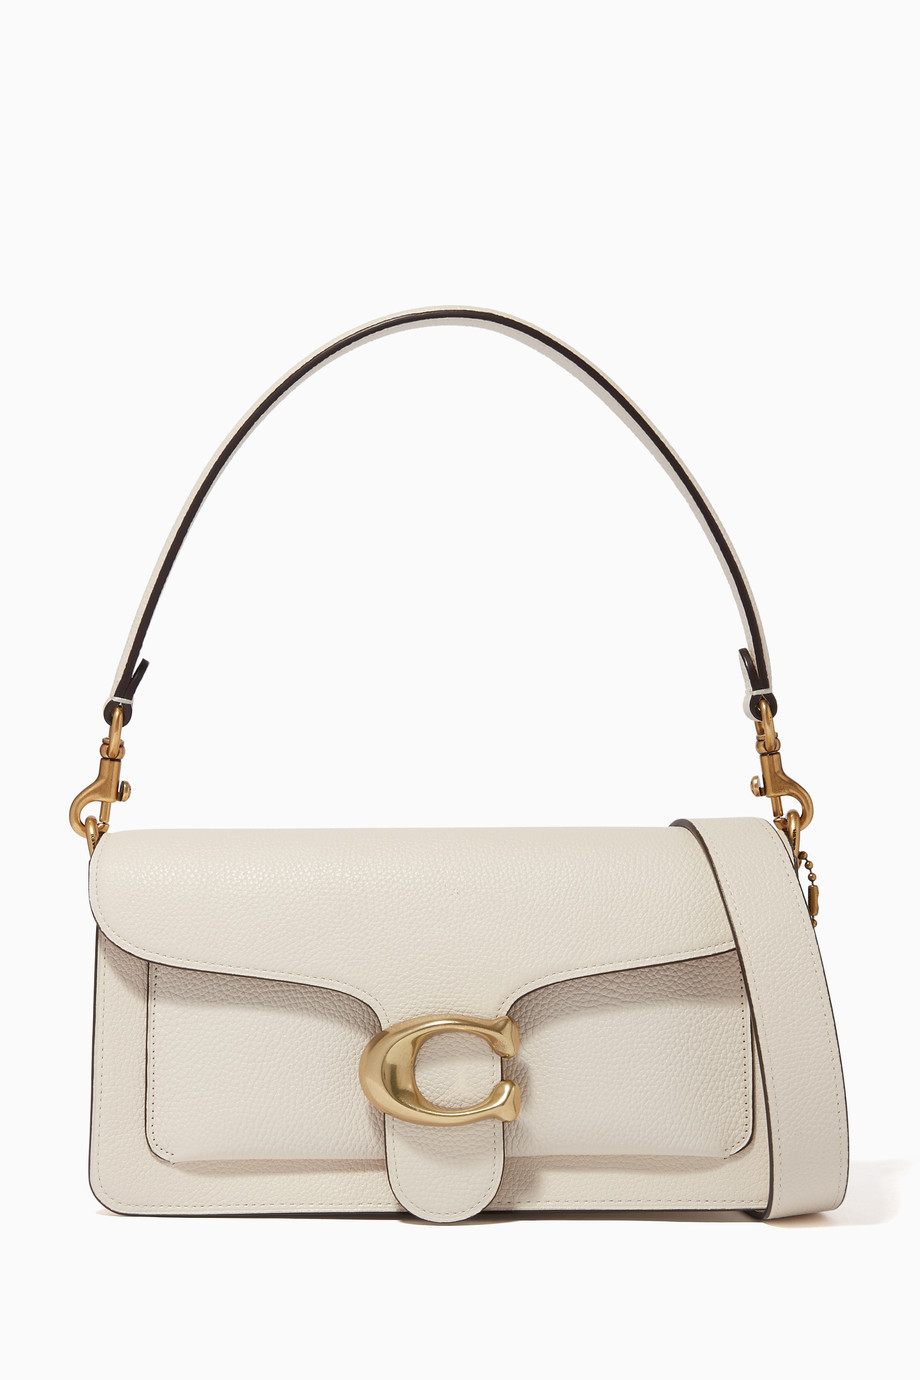 Shop Coach White Tabby 26 Leather Shoulder Bag for Women | Ounass UAE